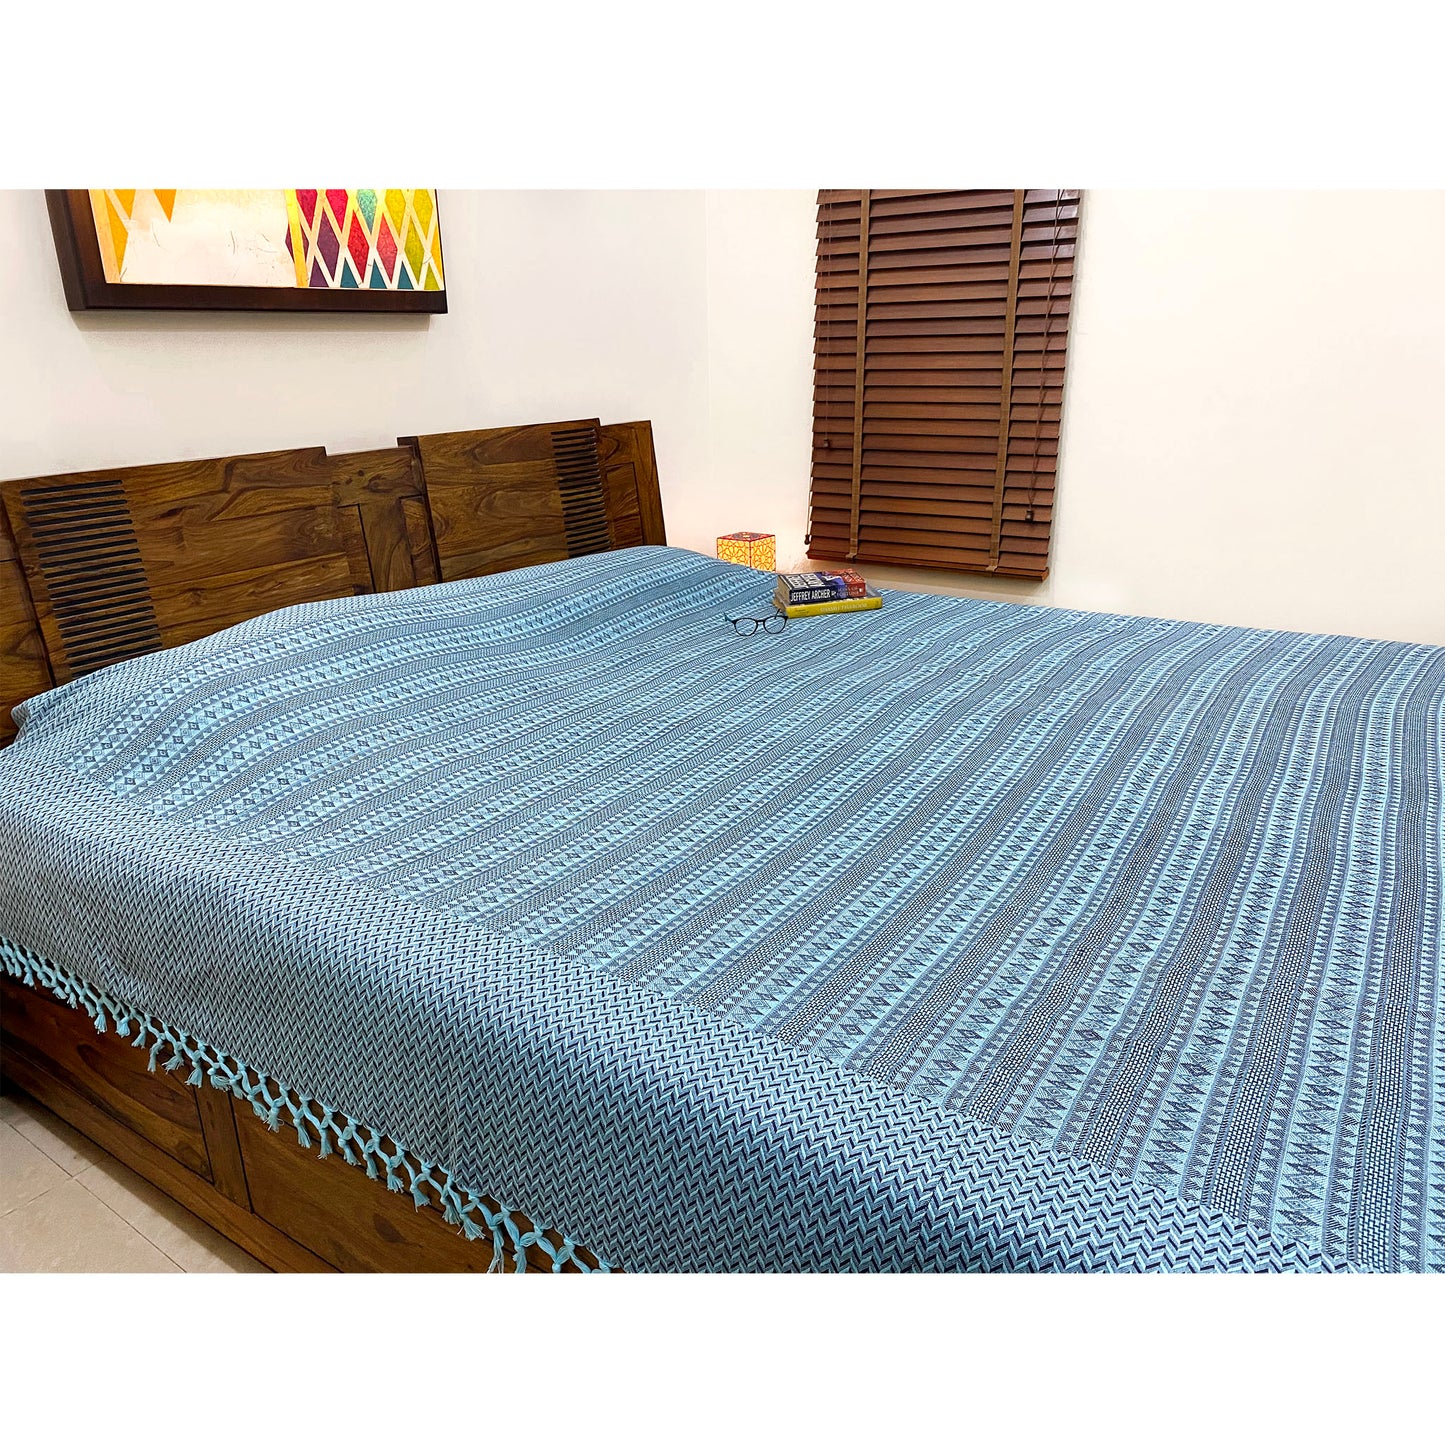 Intricately Woven Handloom Bed  Cover